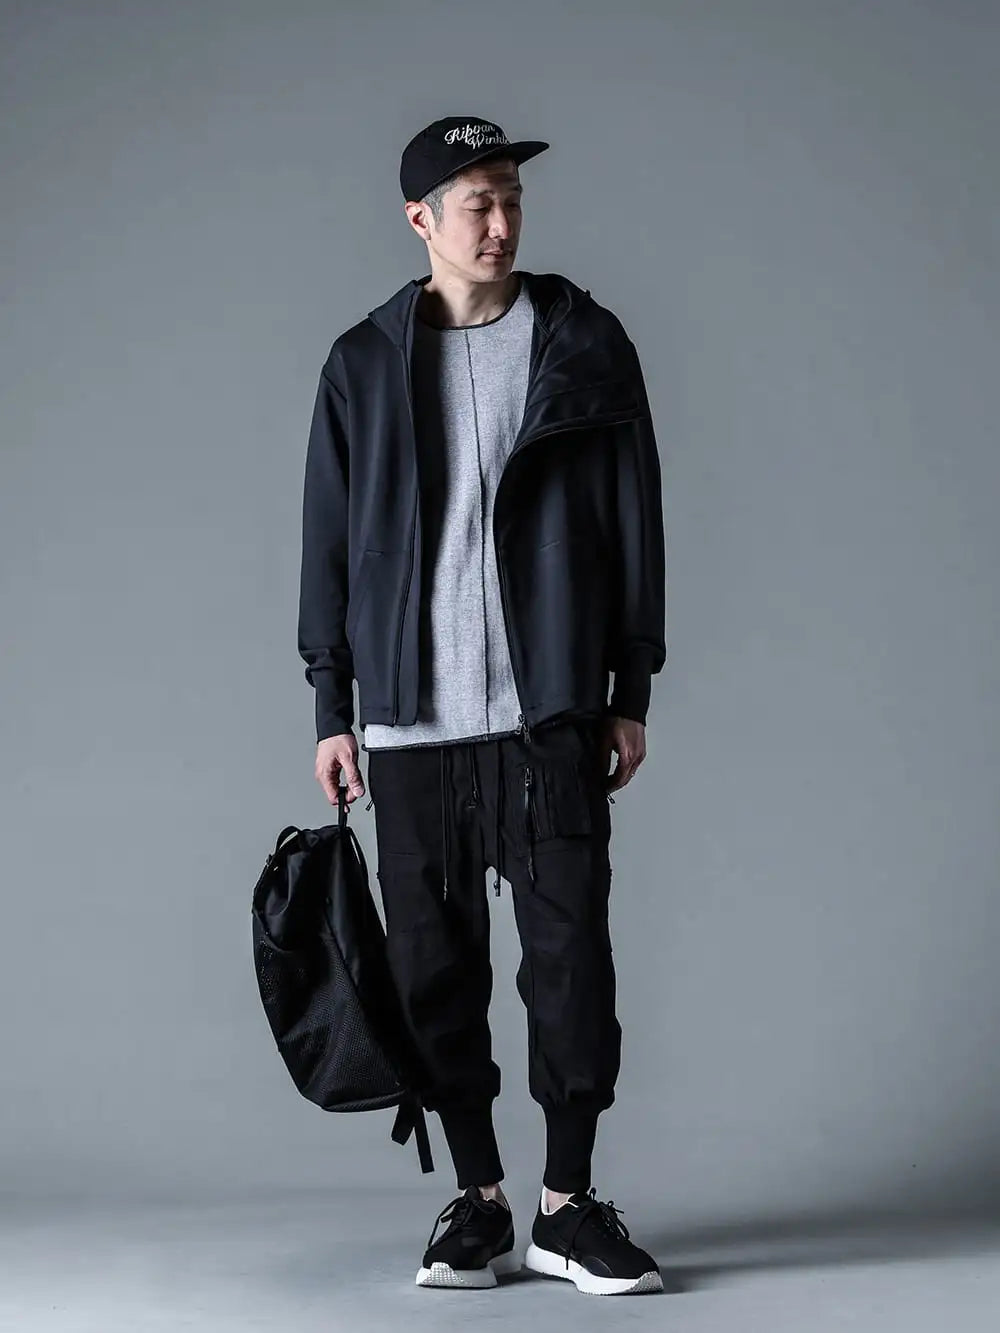 RIPVANWINKLE 24SS Styling - Proposing comfortable everyday wear with hooded jersey and RVW trainers that can be used immediately - RW-151 (FLOPPY CAP) - RW-629 (Hooded Jersey) - RW-639(Balloon Parachute) - RW-615(Rip Trainer Two Black) 1-004